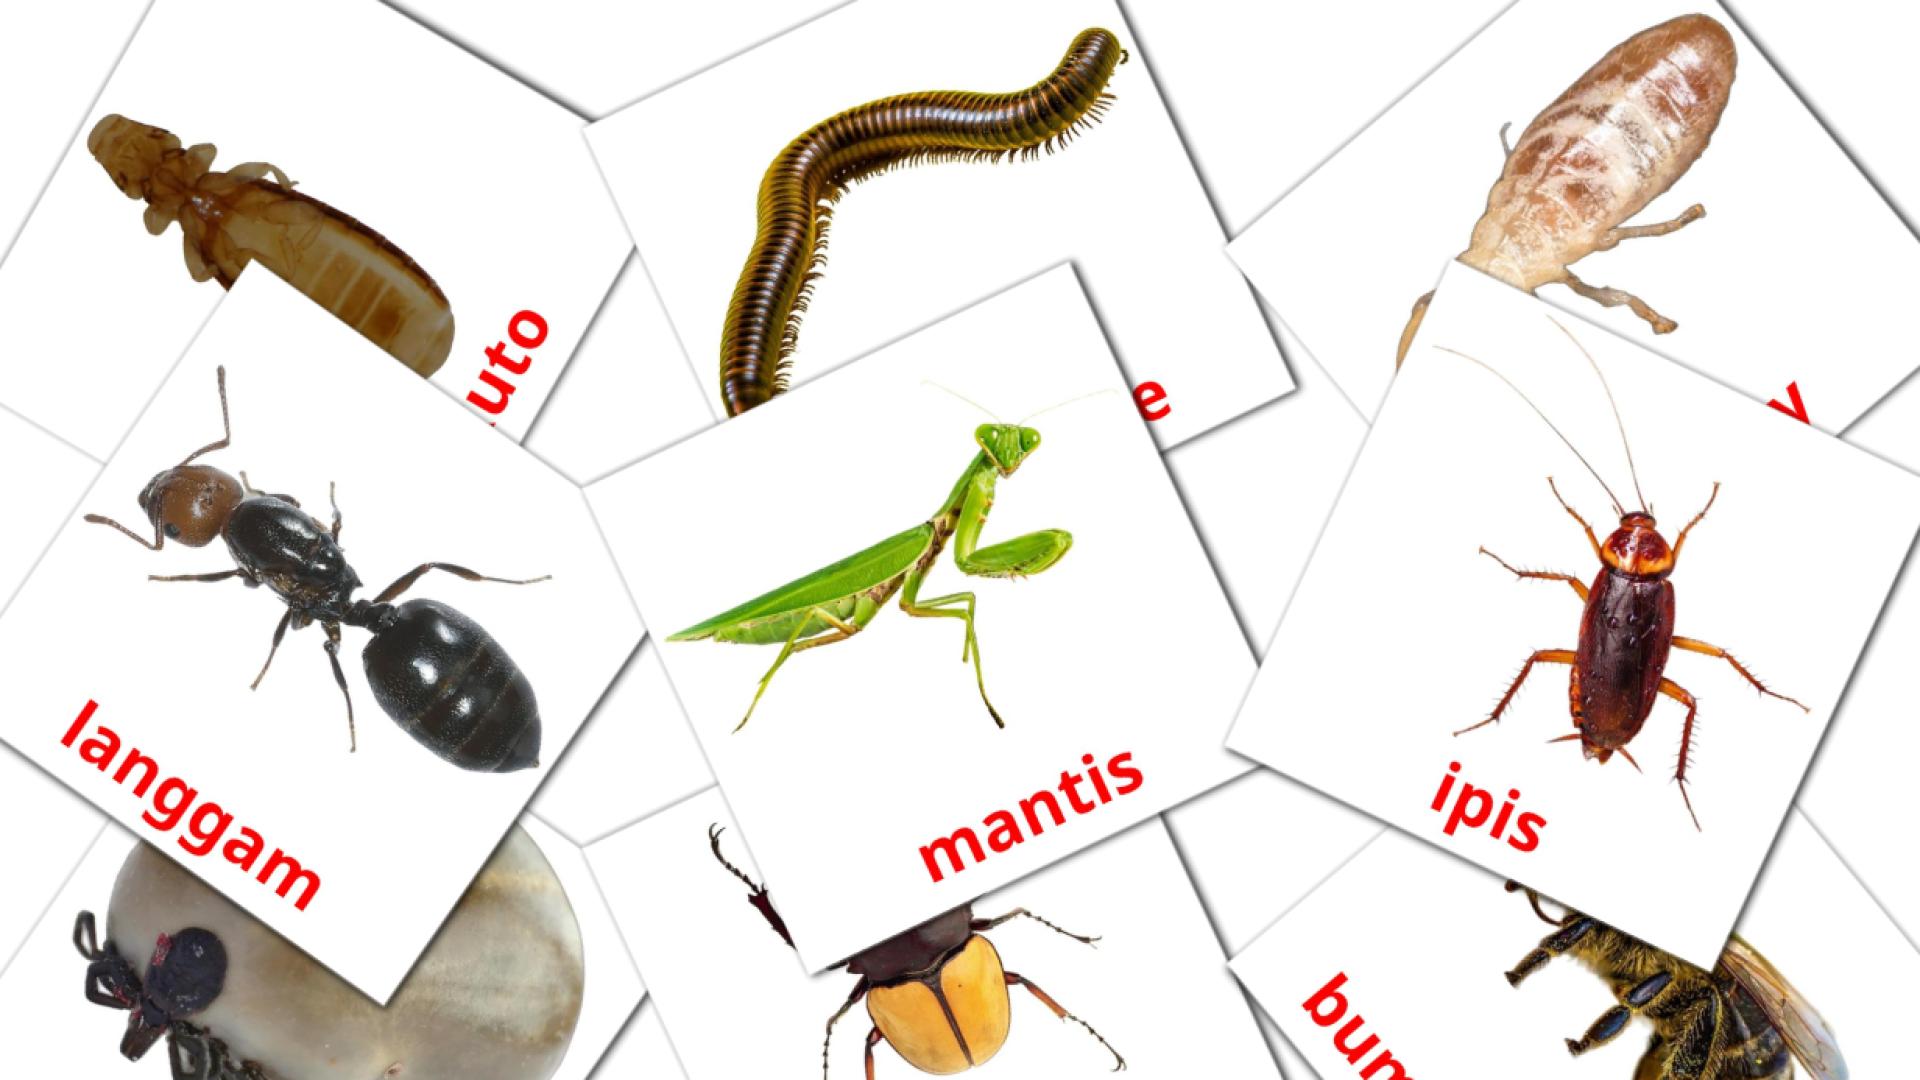 23 Insecto flashcards